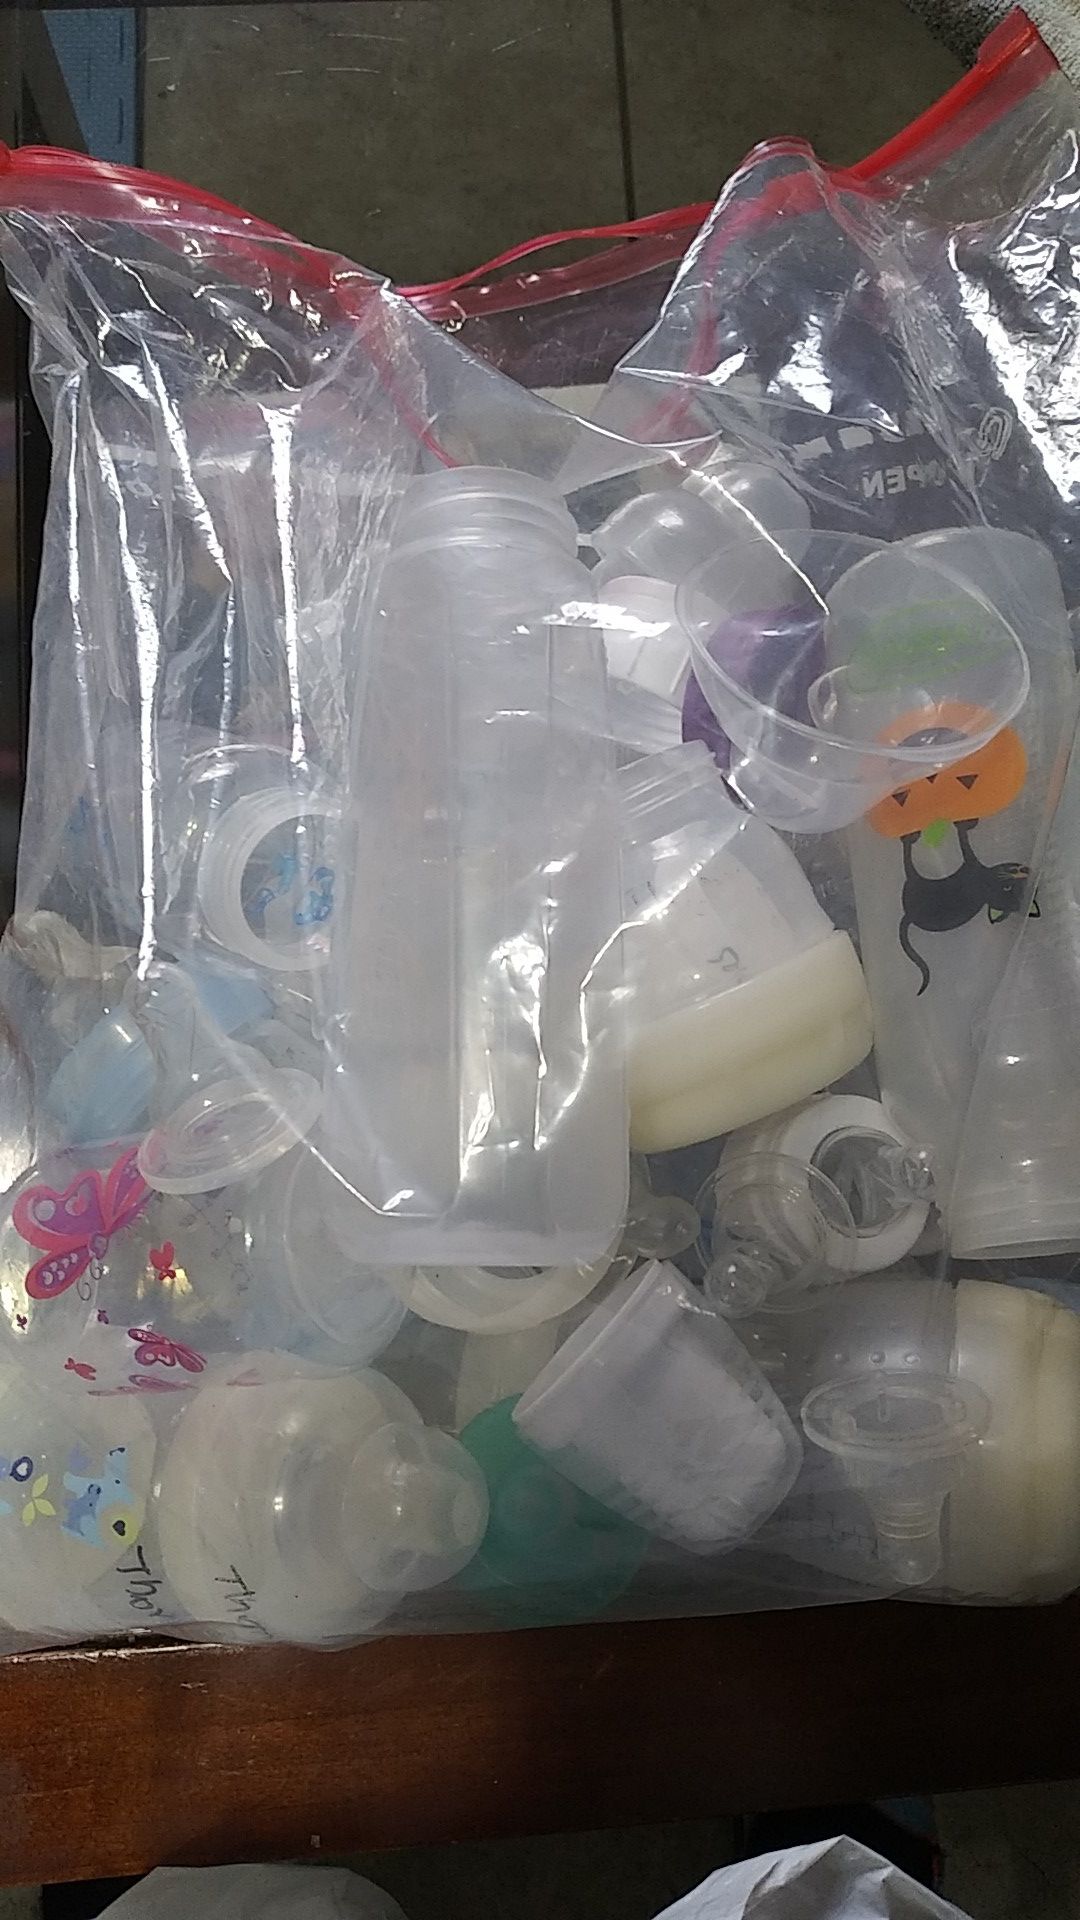 Many assorted baby bottles